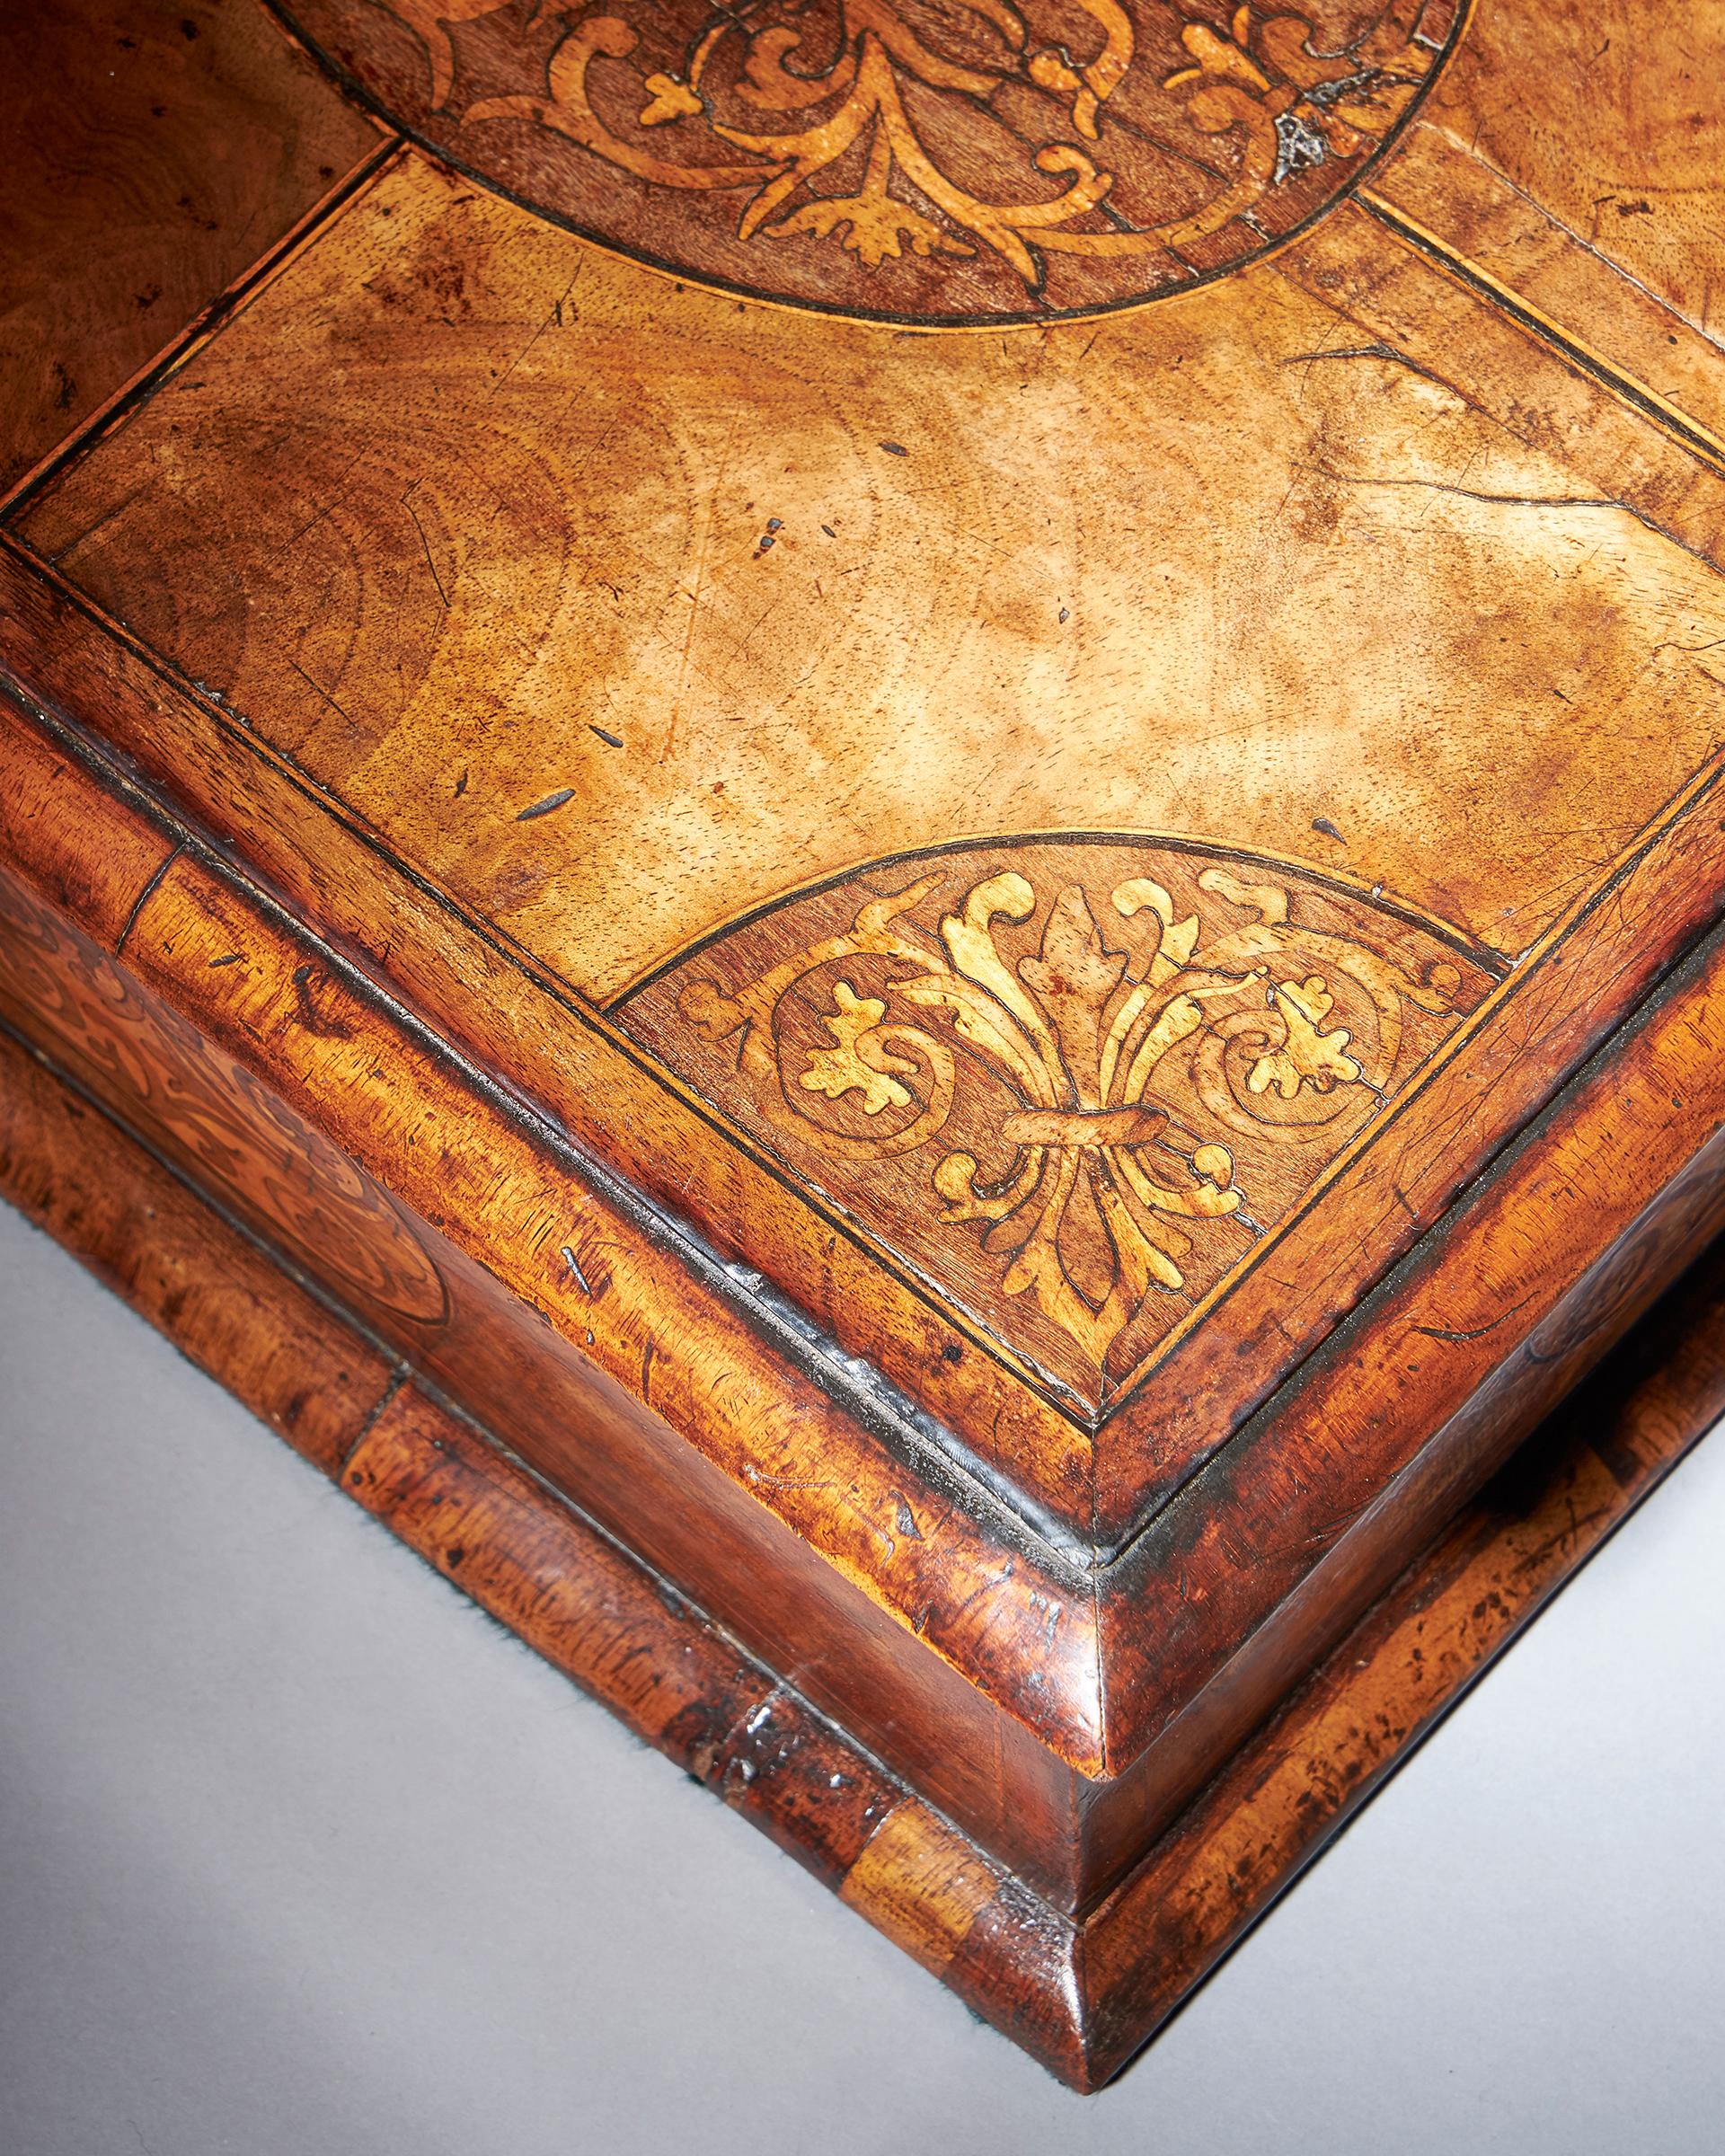 English 17th Century Figured Walnut and Seaweed Marquetry Lace Box For Sale